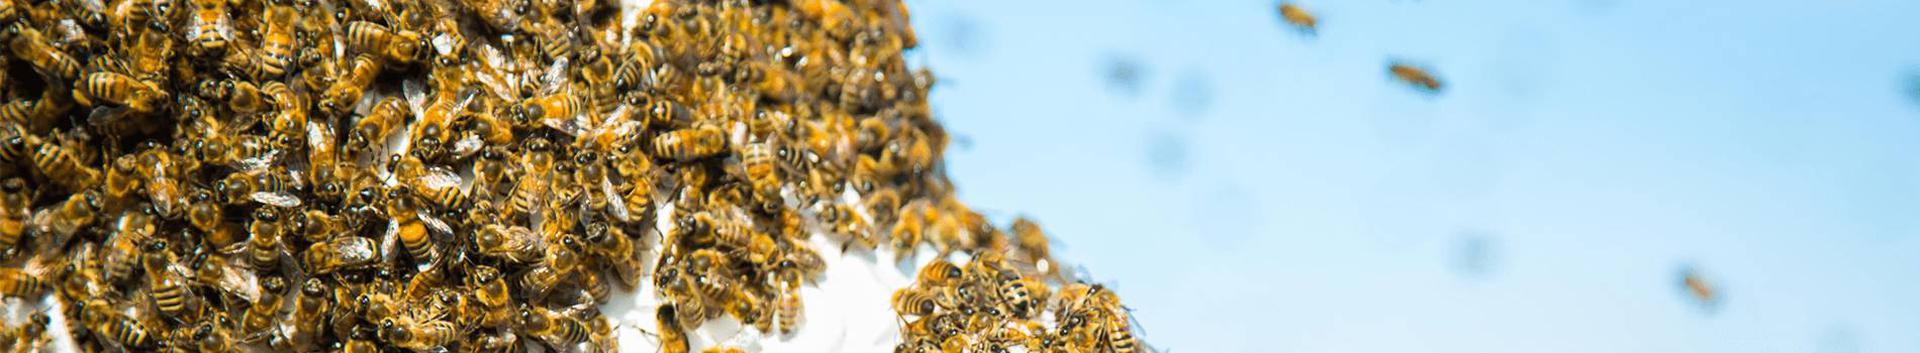 beekeeping, apiculture products